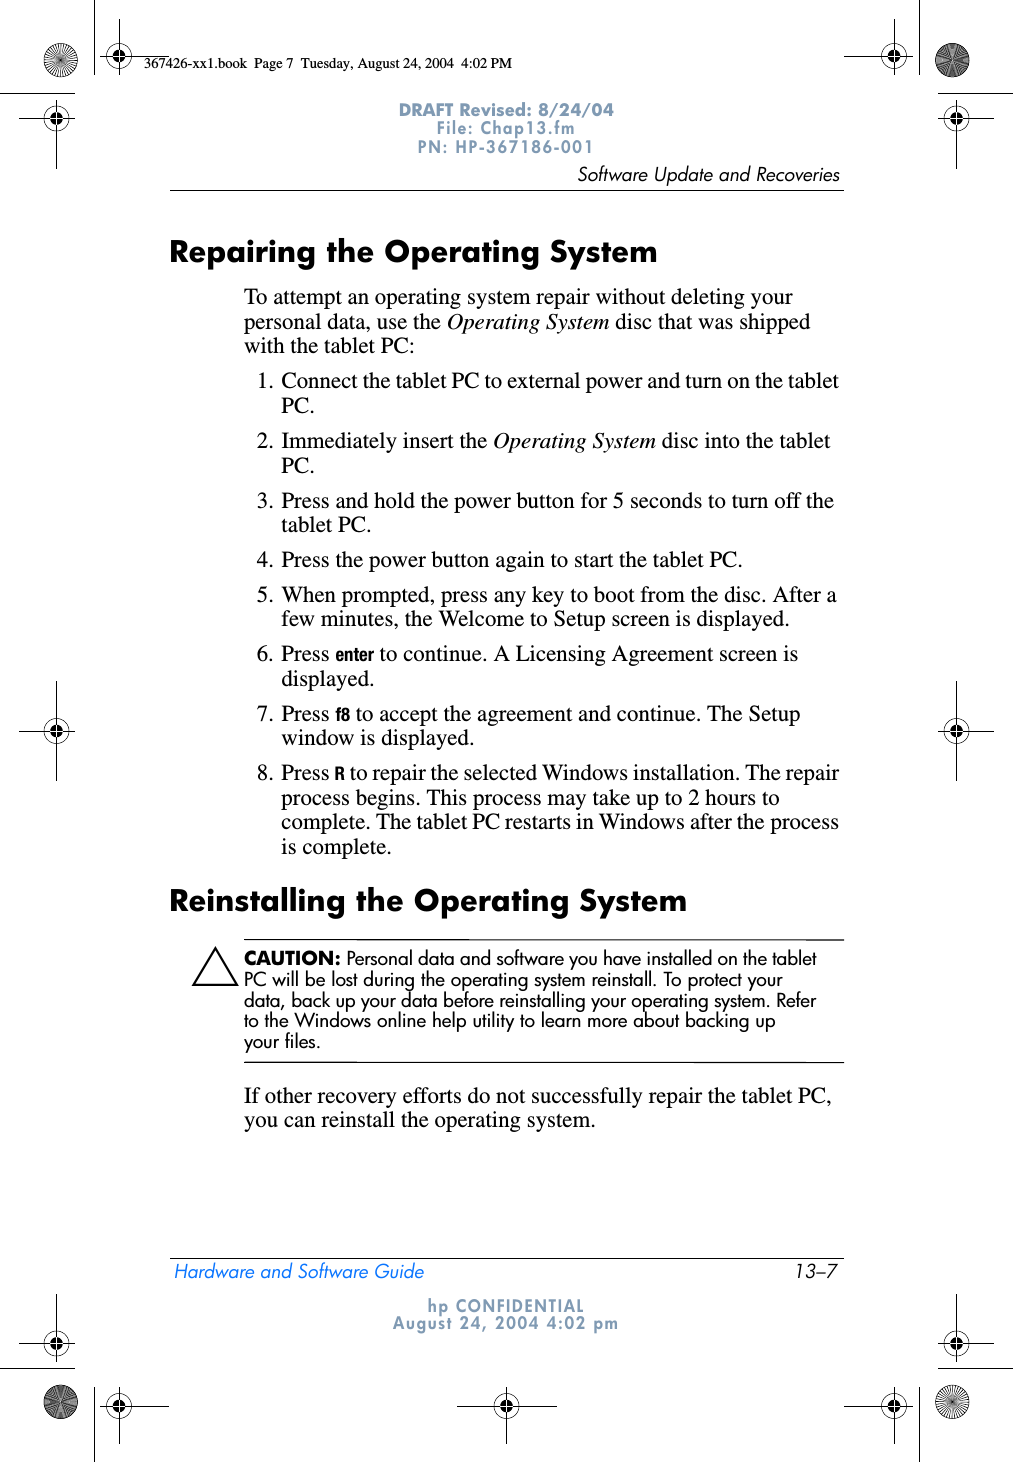 Software Update and RecoveriesHardware and Software Guide 13–7DRAFT Revised: 8/24/04File: Chap13.fm PN: HP-367186-001 hp CONFIDENTIALAugust 24, 2004 4:02 pmRepairing the Operating SystemTo attempt an operating system repair without deleting your personal data, use the Operating System disc that was shipped with the tablet PC:1. Connect the tablet PC to external power and turn on the tablet PC.2. Immediately insert the Operating System disc into the tablet PC.3. Press and hold the power button for 5 seconds to turn off the tablet PC.4. Press the power button again to start the tablet PC.5. When prompted, press any key to boot from the disc. After a few minutes, the Welcome to Setup screen is displayed.6. Press enter to continue. A Licensing Agreement screen is displayed.7. Press f8 to accept the agreement and continue. The Setup window is displayed.8. Press R to repair the selected Windows installation. The repair process begins. This process may take up to 2 hours to complete. The tablet PC restarts in Windows after the process is complete.Reinstalling the Operating SystemÄCAUTION: Personal data and software you have installed on the tablet PC will be lost during the operating system reinstall. To protect your data, back up your data before reinstalling your operating system. Refer to the Windows online help utility to learn more about backing up your files.If other recovery efforts do not successfully repair the tablet PC, you can reinstall the operating system.367426-xx1.book  Page 7  Tuesday, August 24, 2004  4:02 PM